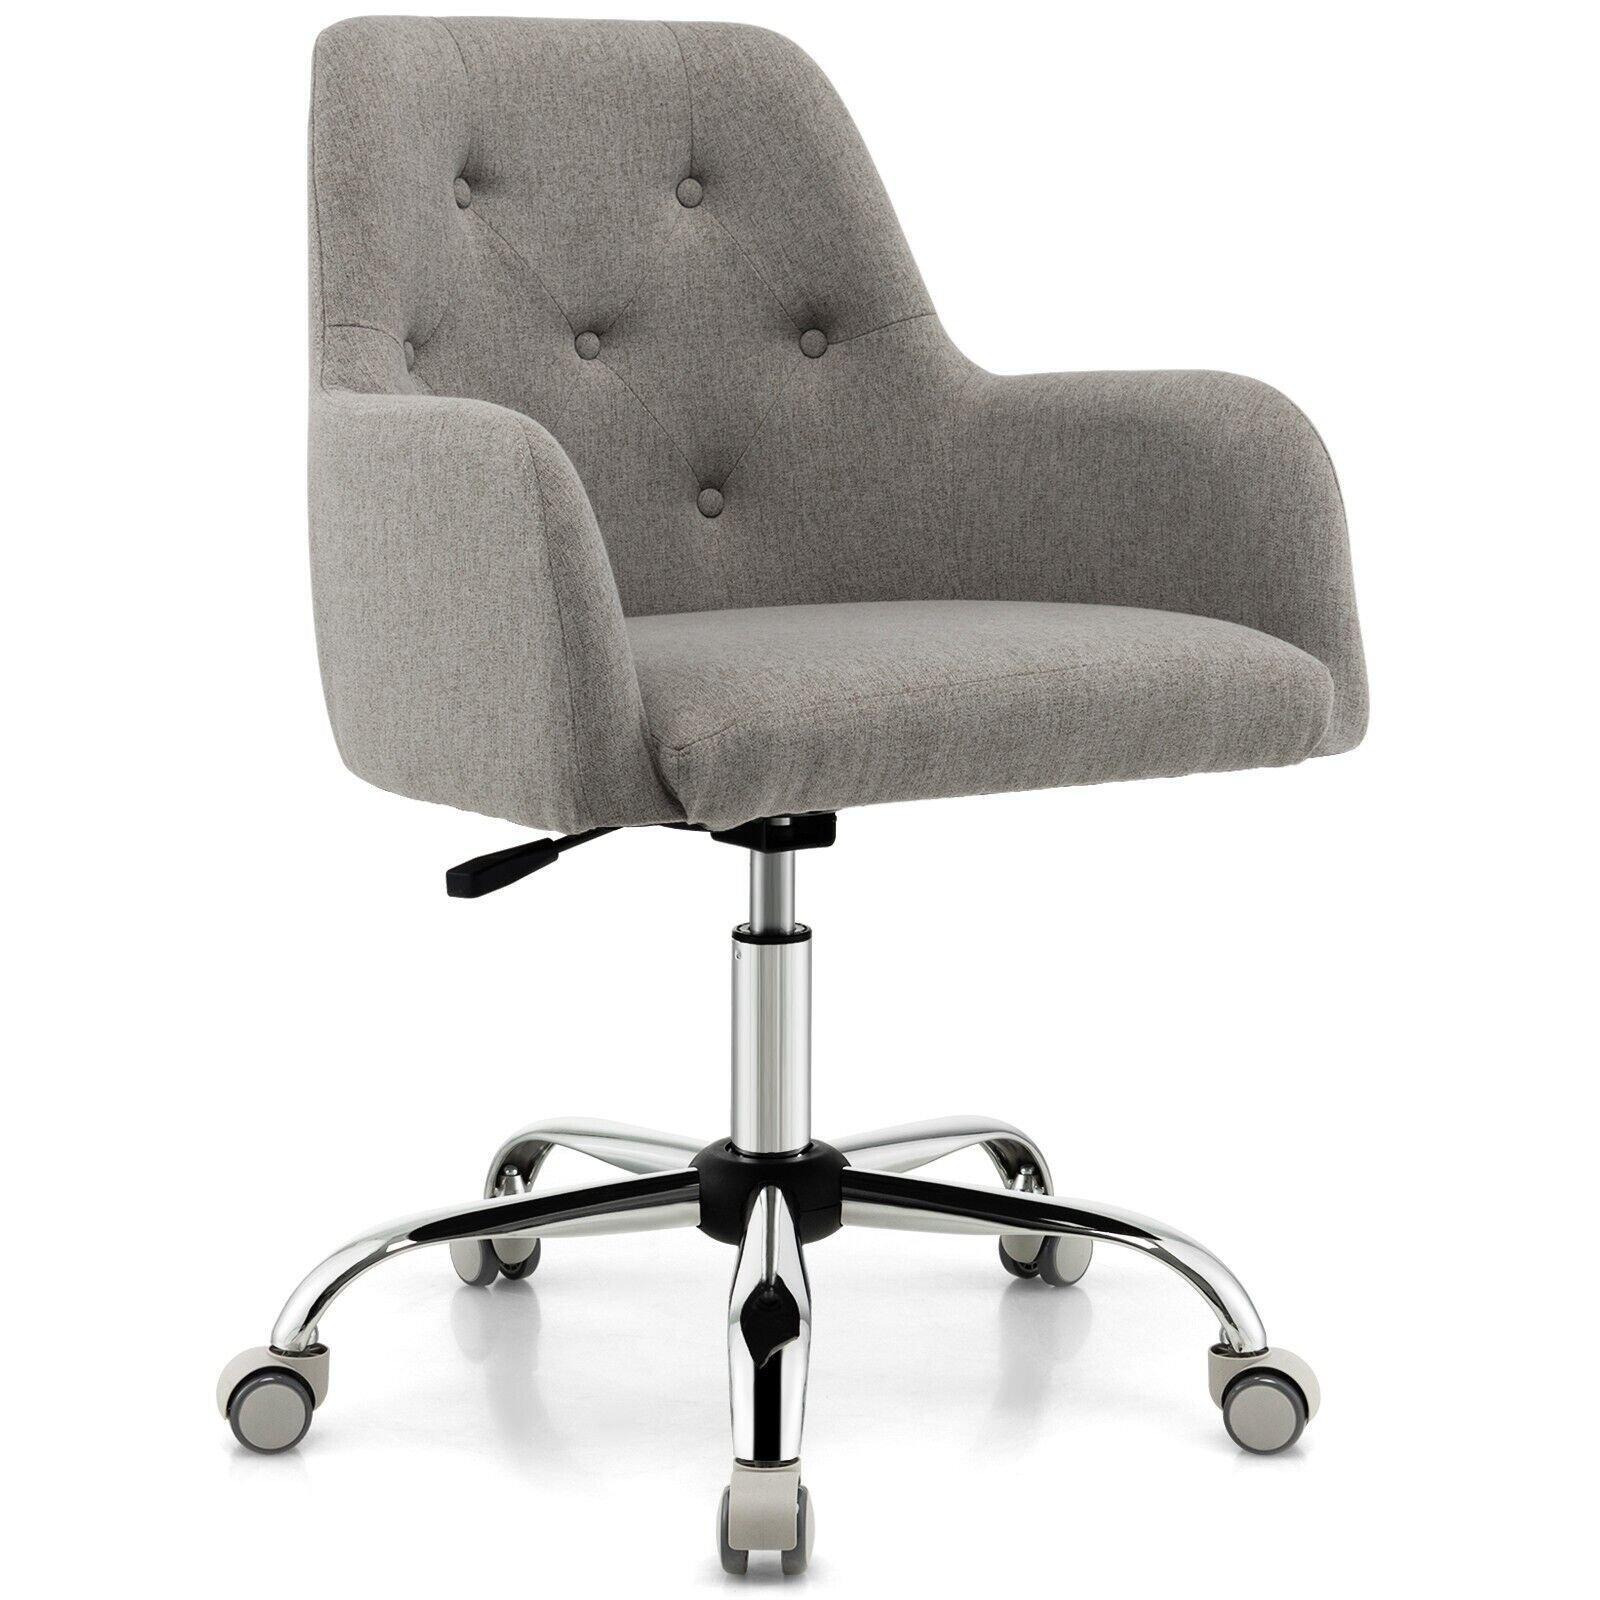 Height Adjustable Office Desk Chair 360 Degree Swivel Task Chair Rolling Accent Chair - image 1